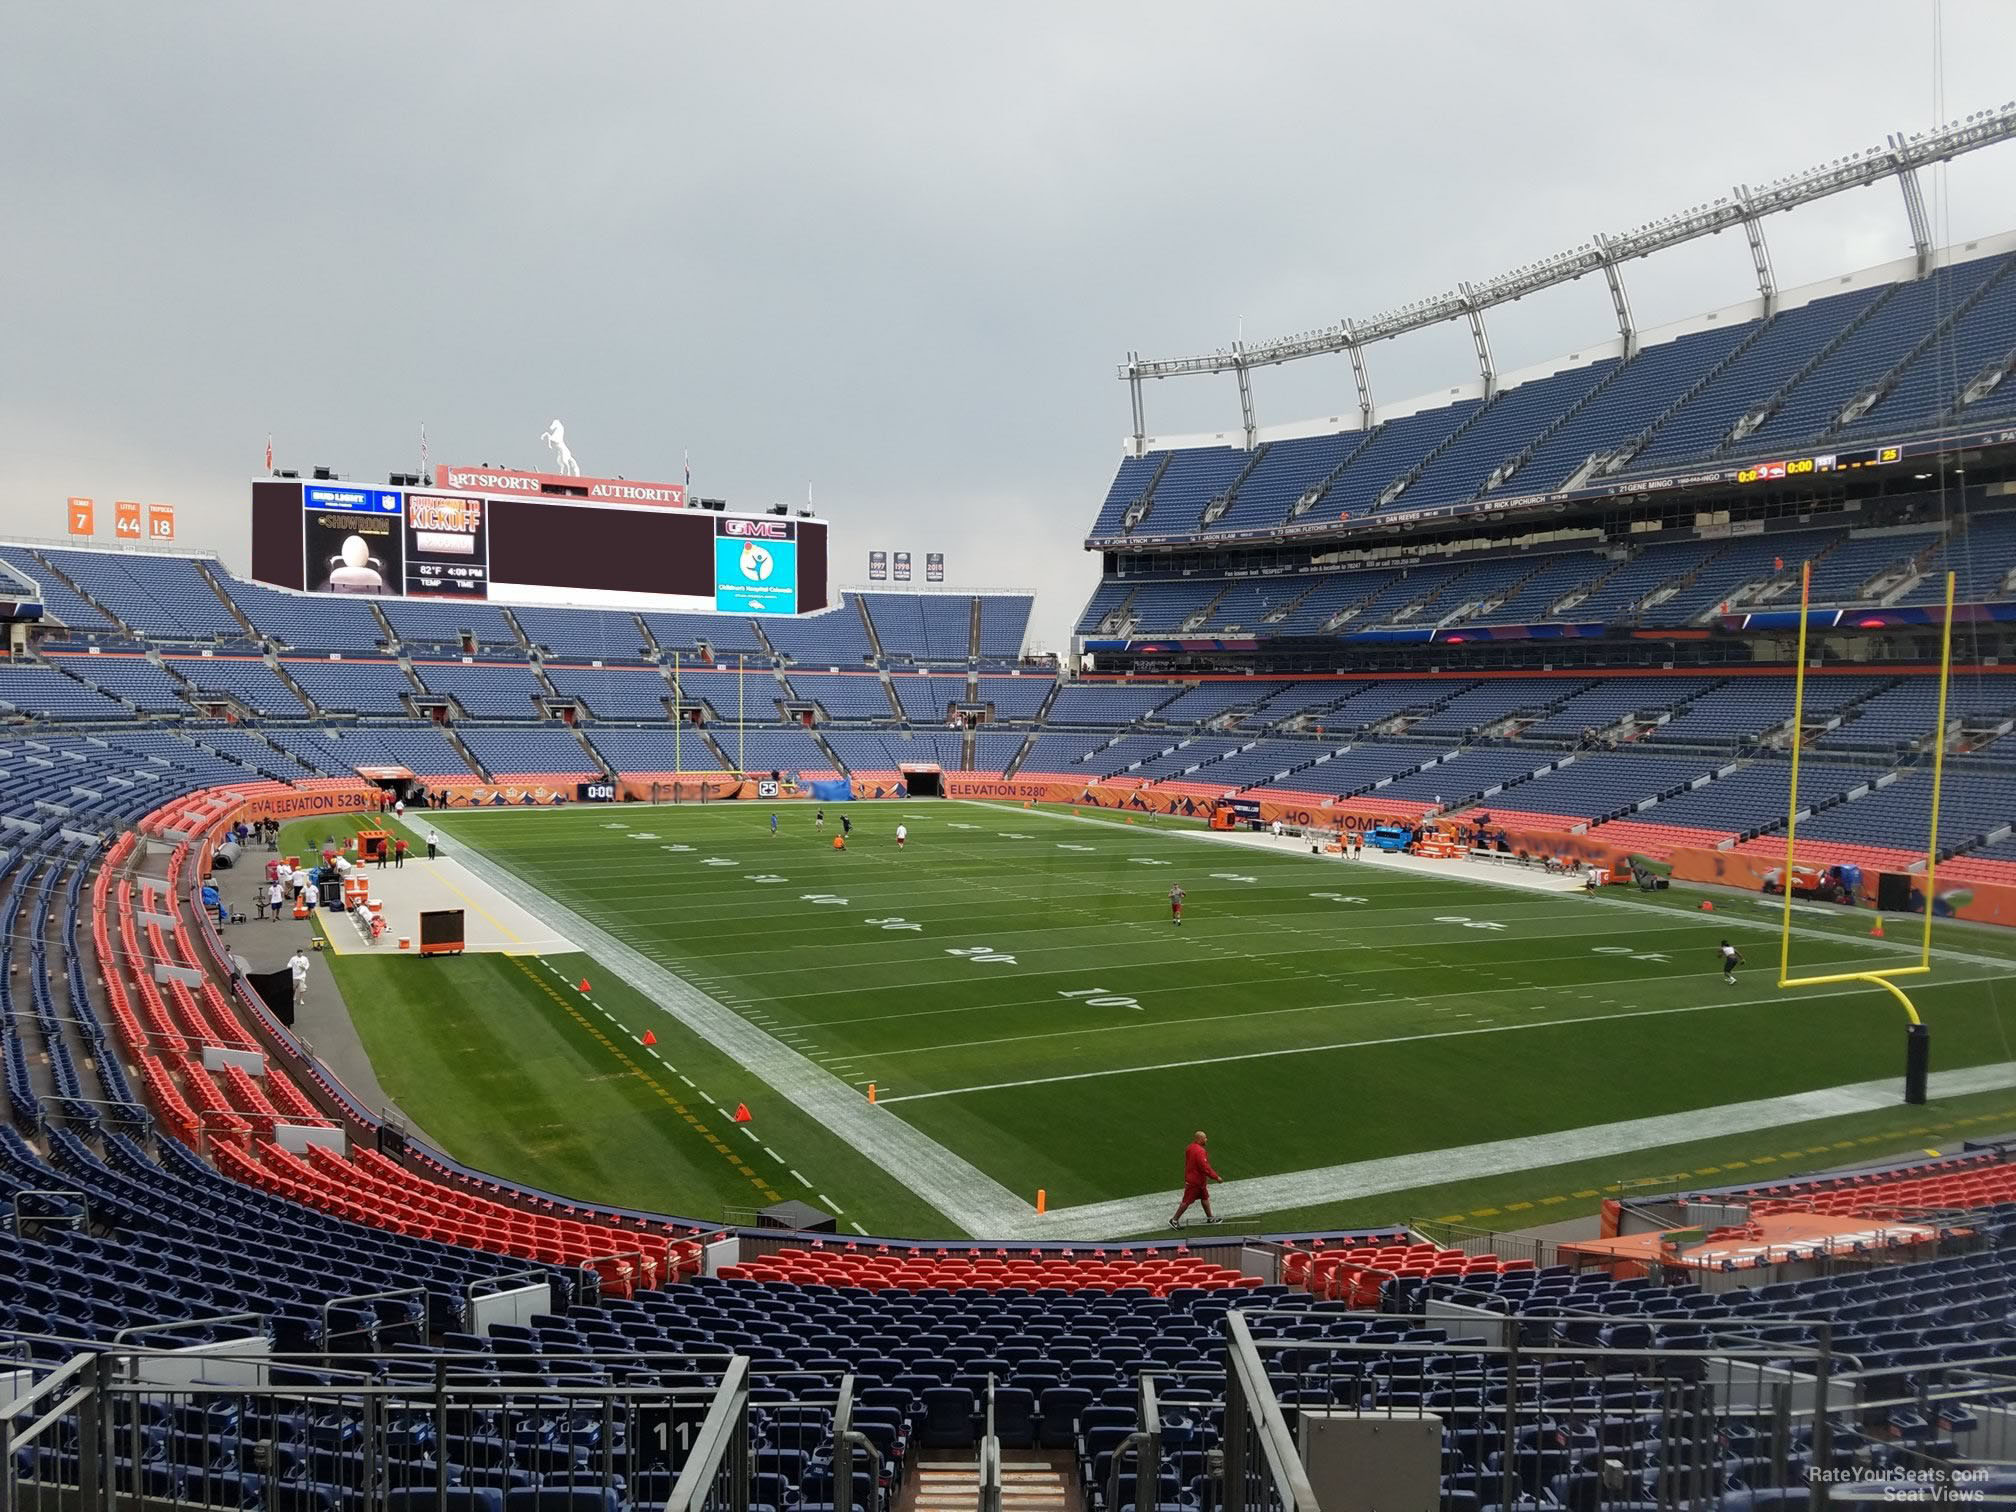 section 117, row 30 seat view  - empower field (at mile high)